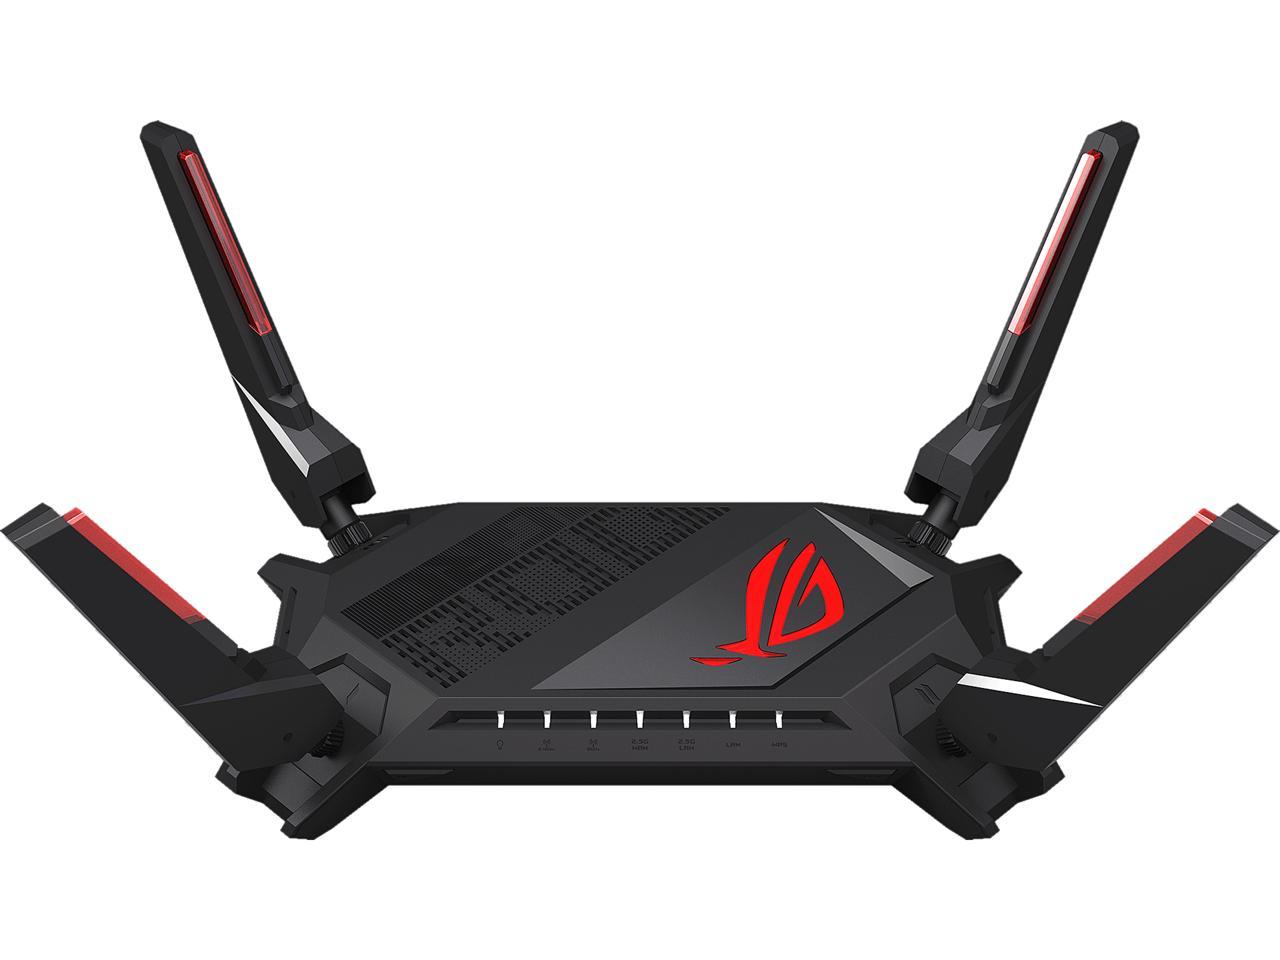 asus-rog-rapture-gt-ax6000-gaming-router